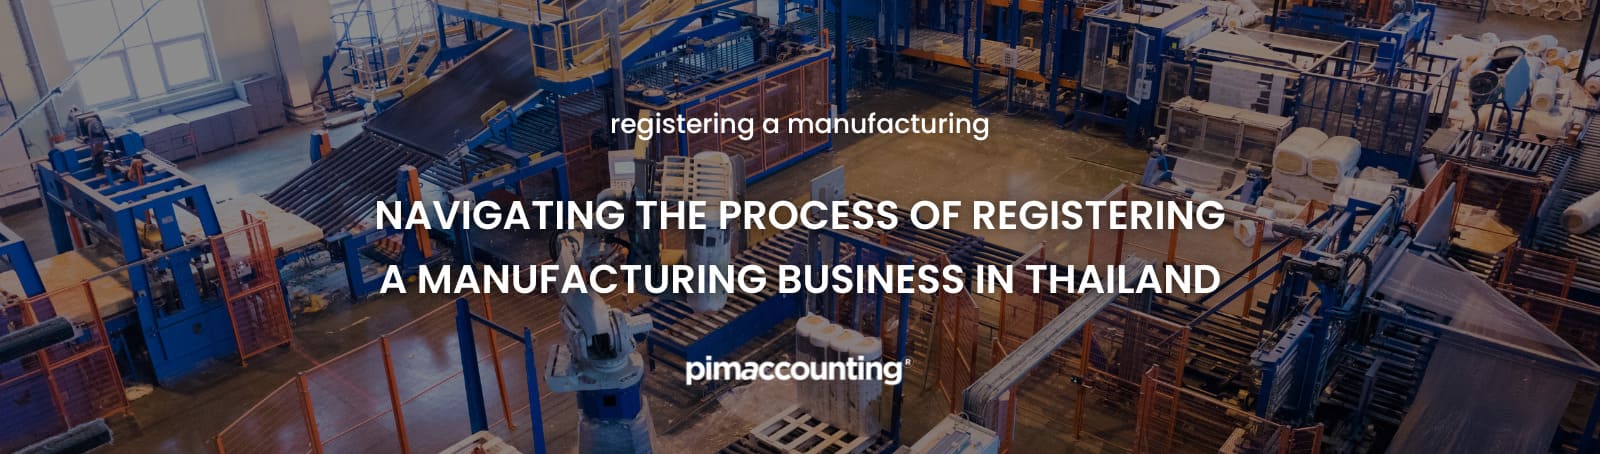 Navigating the process of registering a manufacturing business in Thailand - Pimaccounting